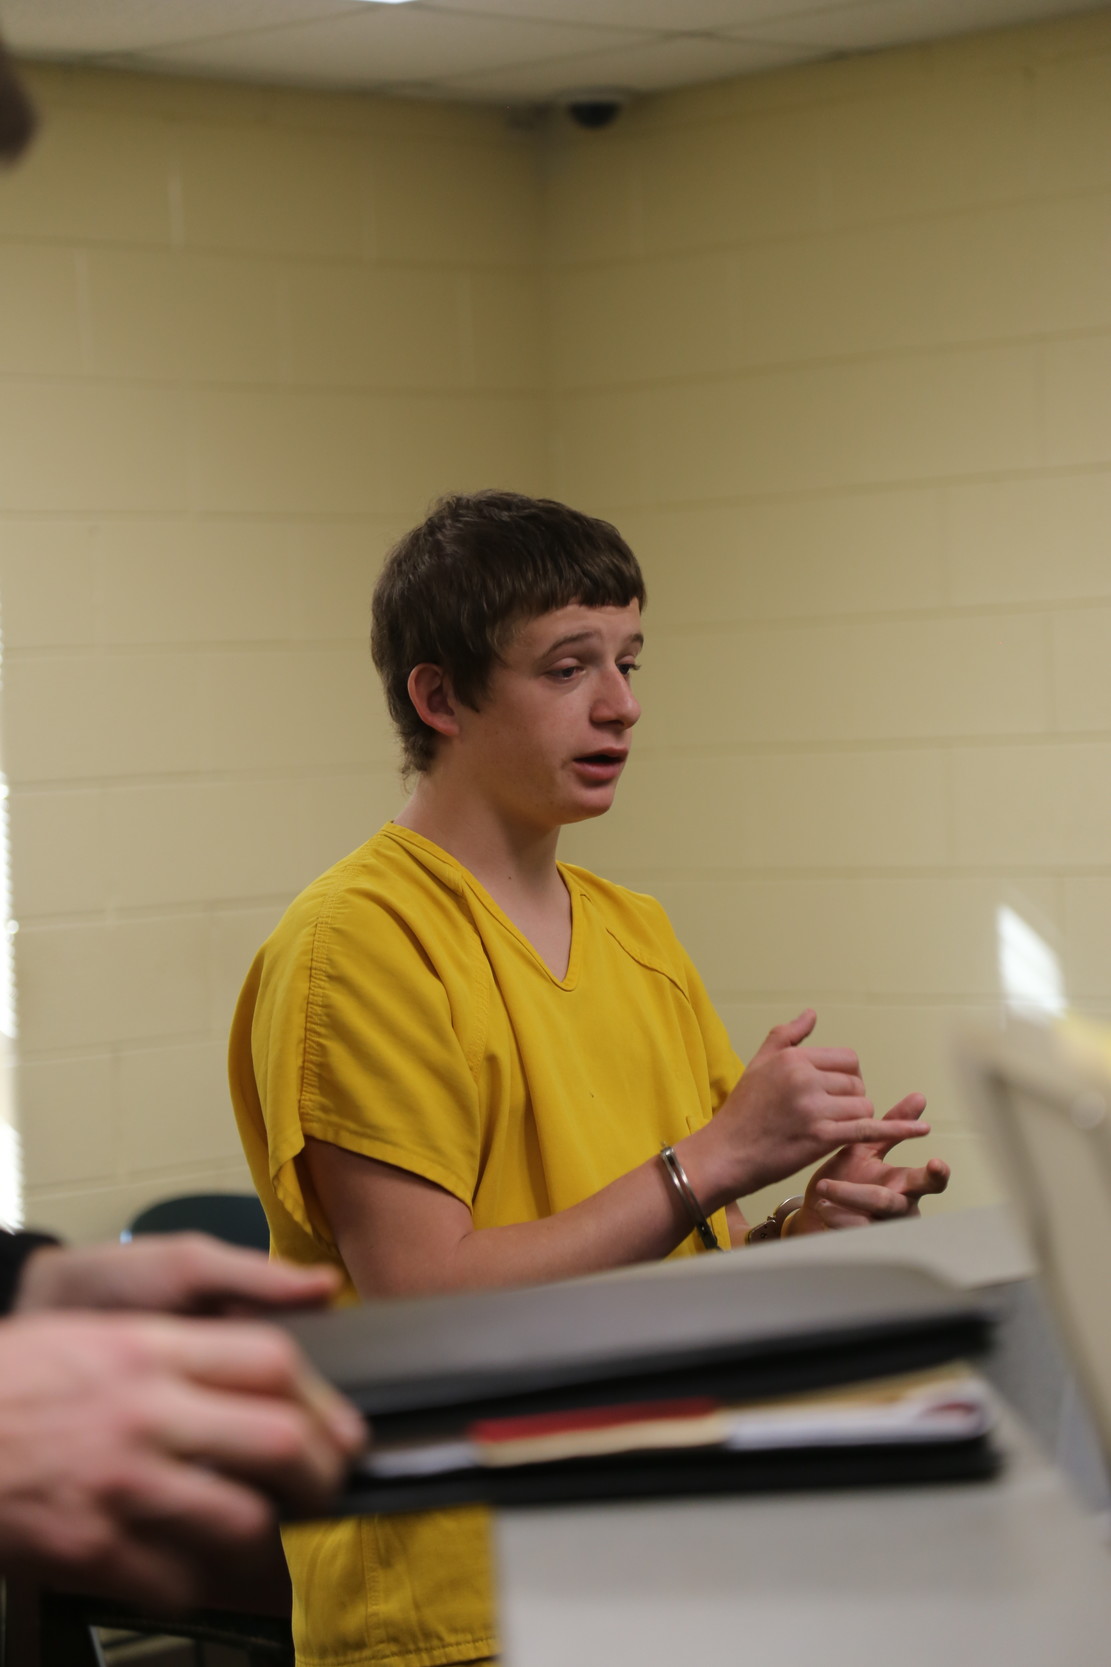 Thomas Euten, 17, tells Magistrate Judge Fred Gordon Jr. that some of the items provided through the Sumter Fire Department Explorer program were destroyed in the house fire he reportedly set Monday.